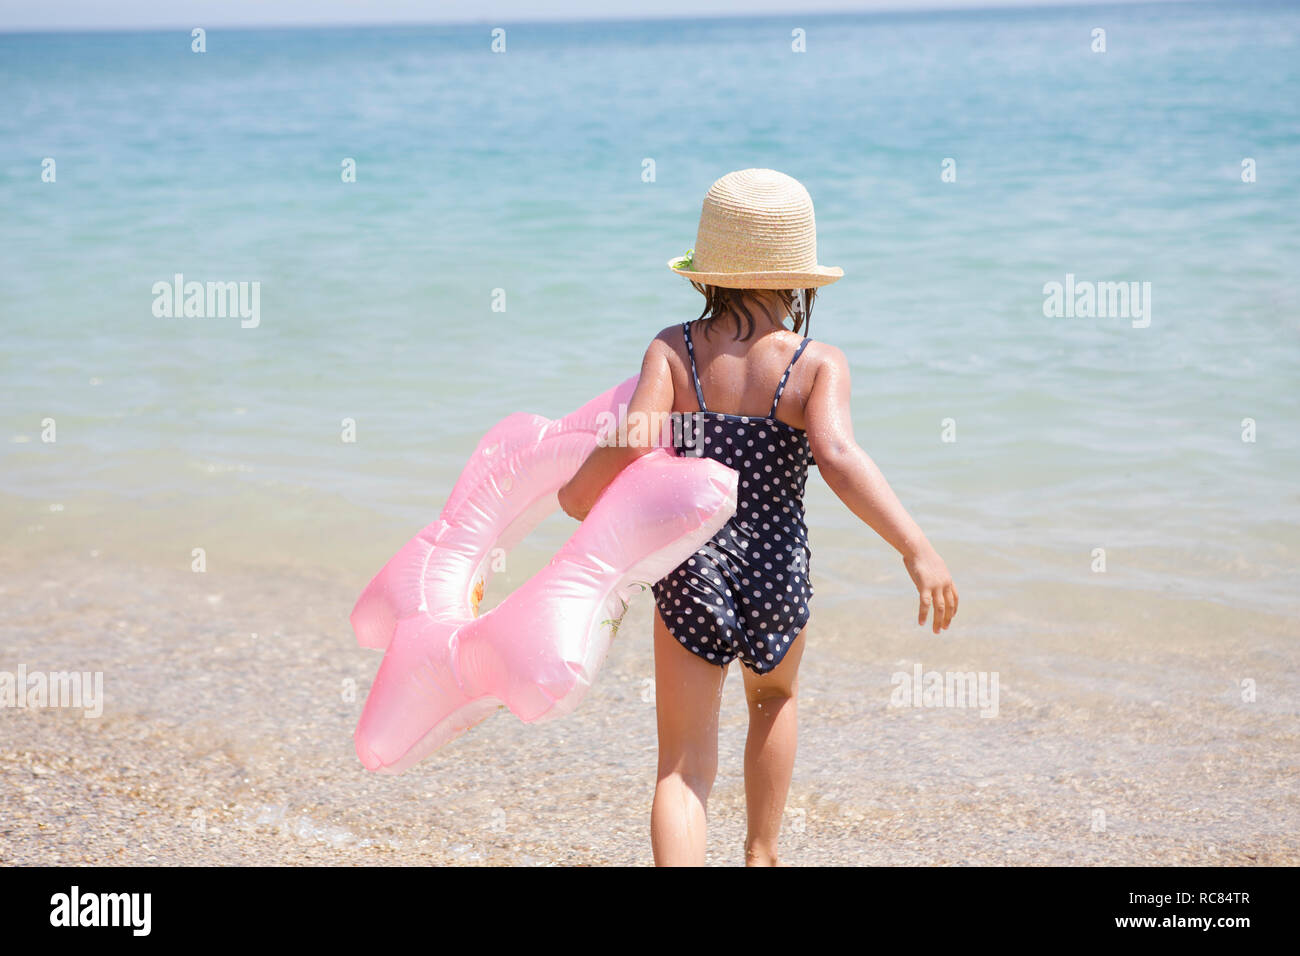 Girl carrying pink inflatable into sea, Scopello, Sicily, Italy Stock Photo